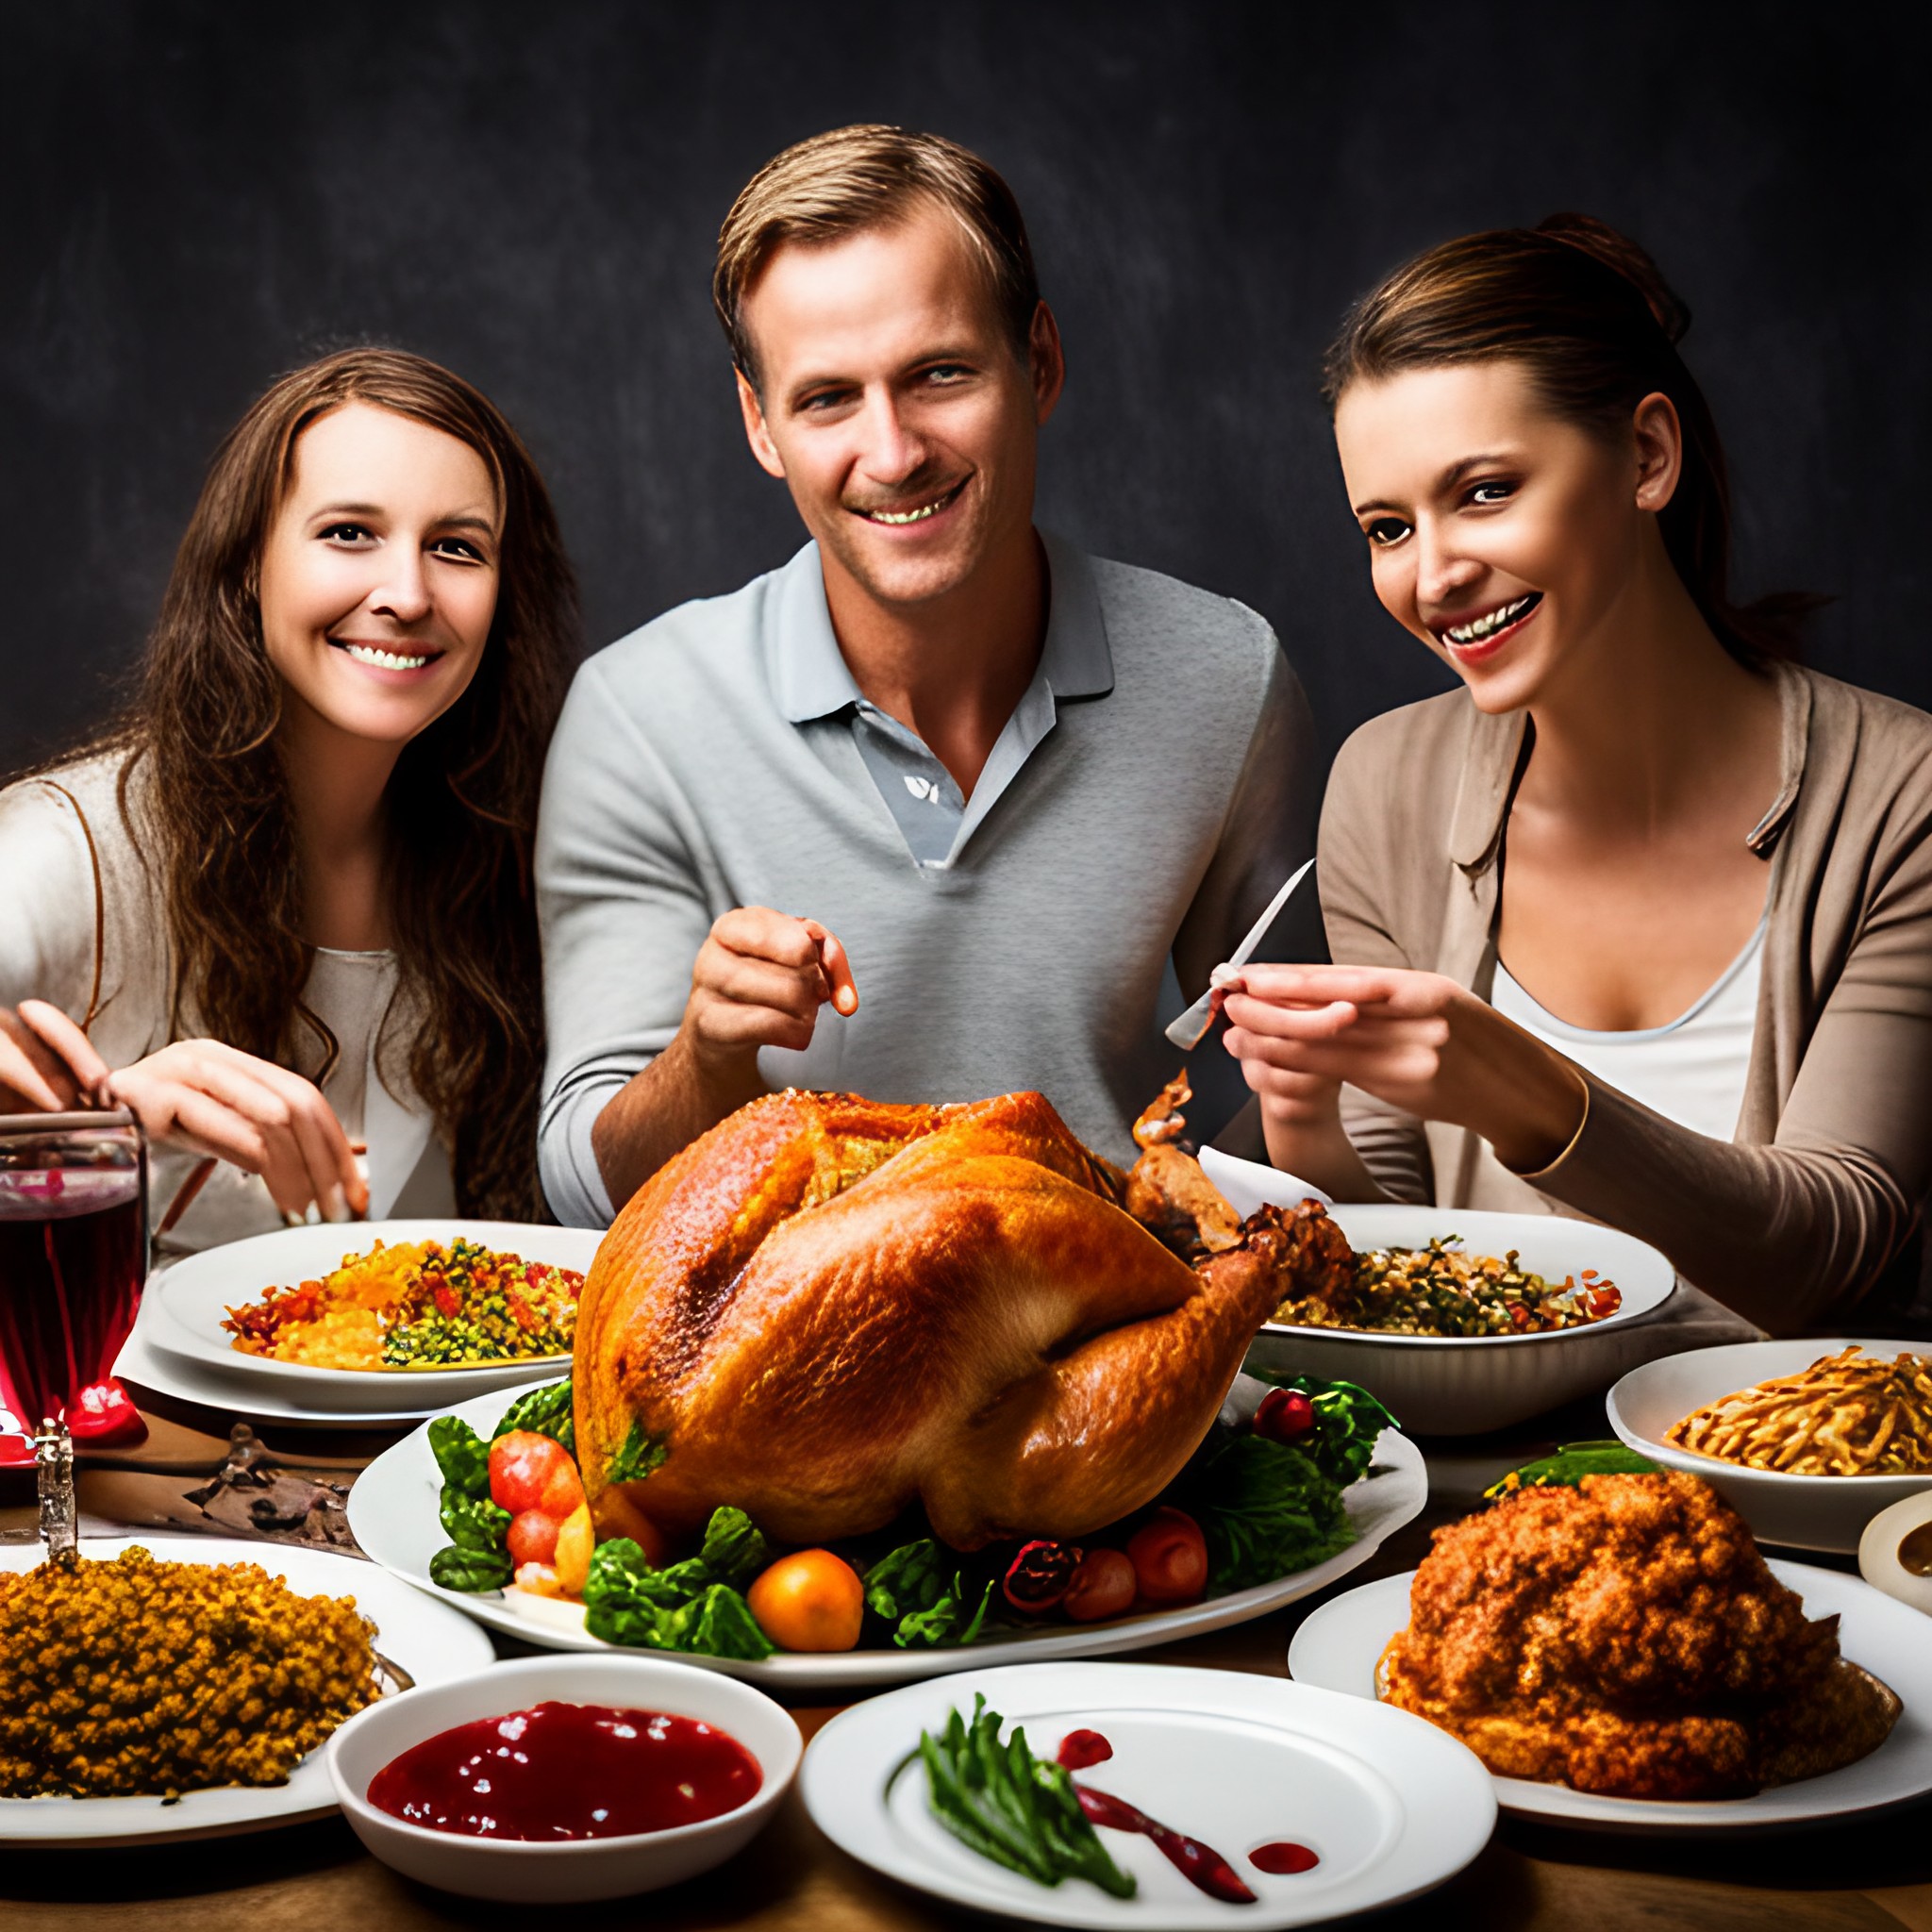 10 Easy Suggestions for a Stress-Free Thanksgiving Dinner